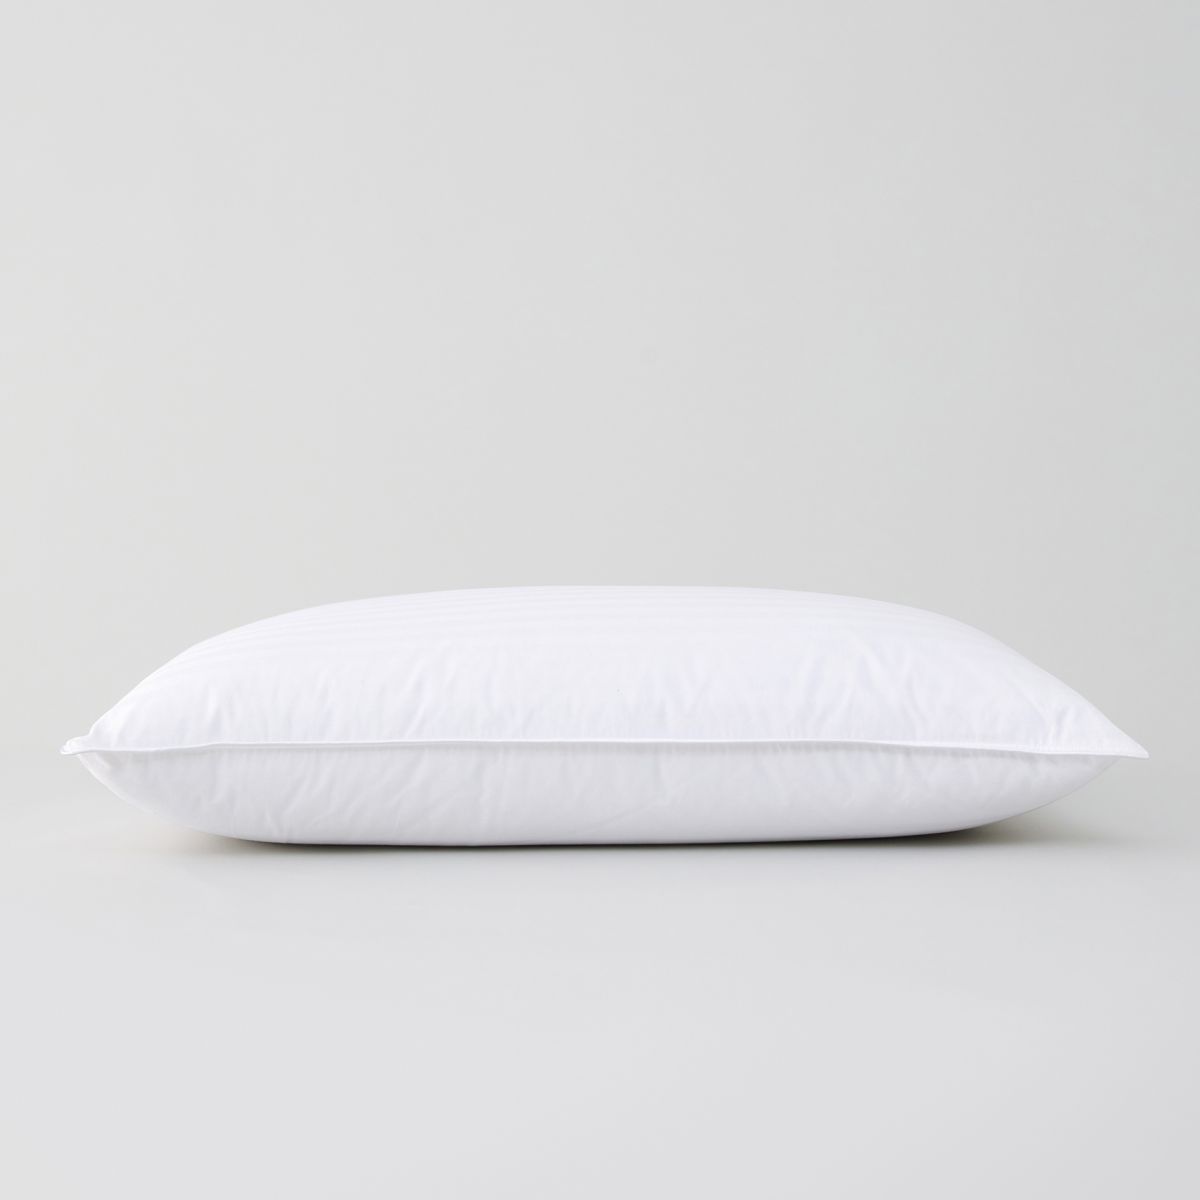 Deluxe Feather & Down Pillow